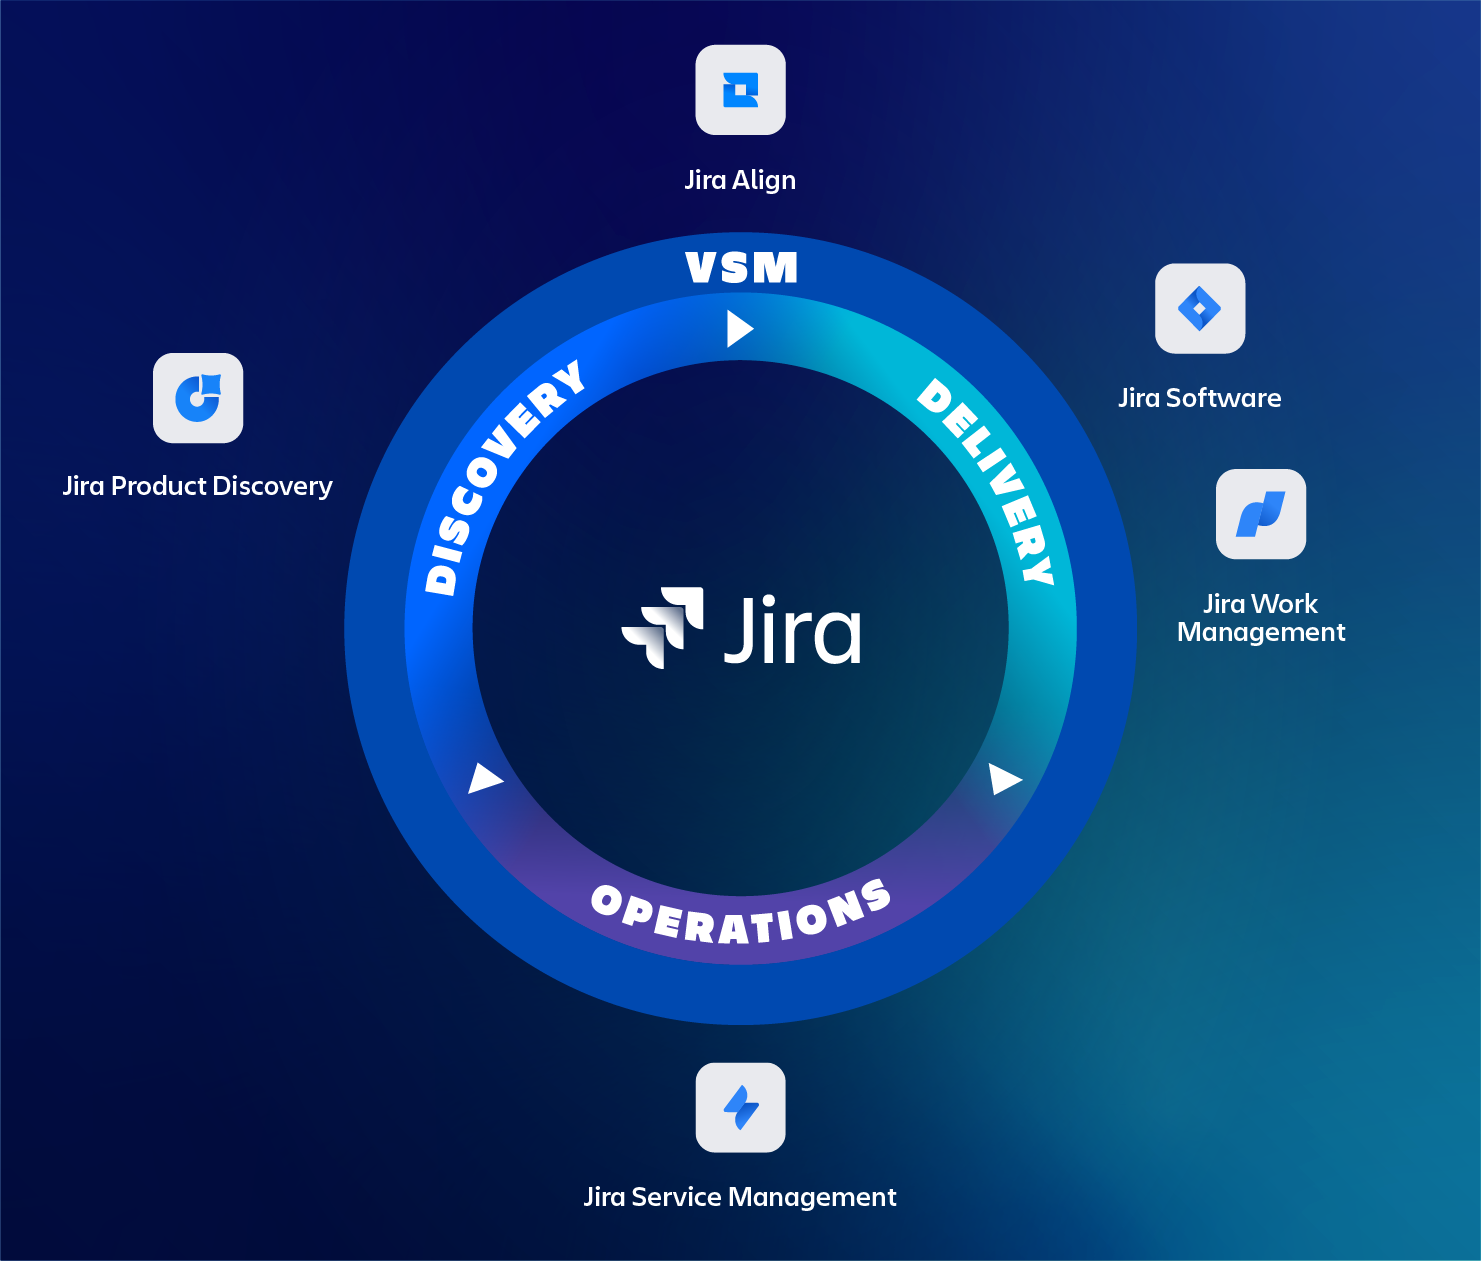 New: Jira Product Discovery